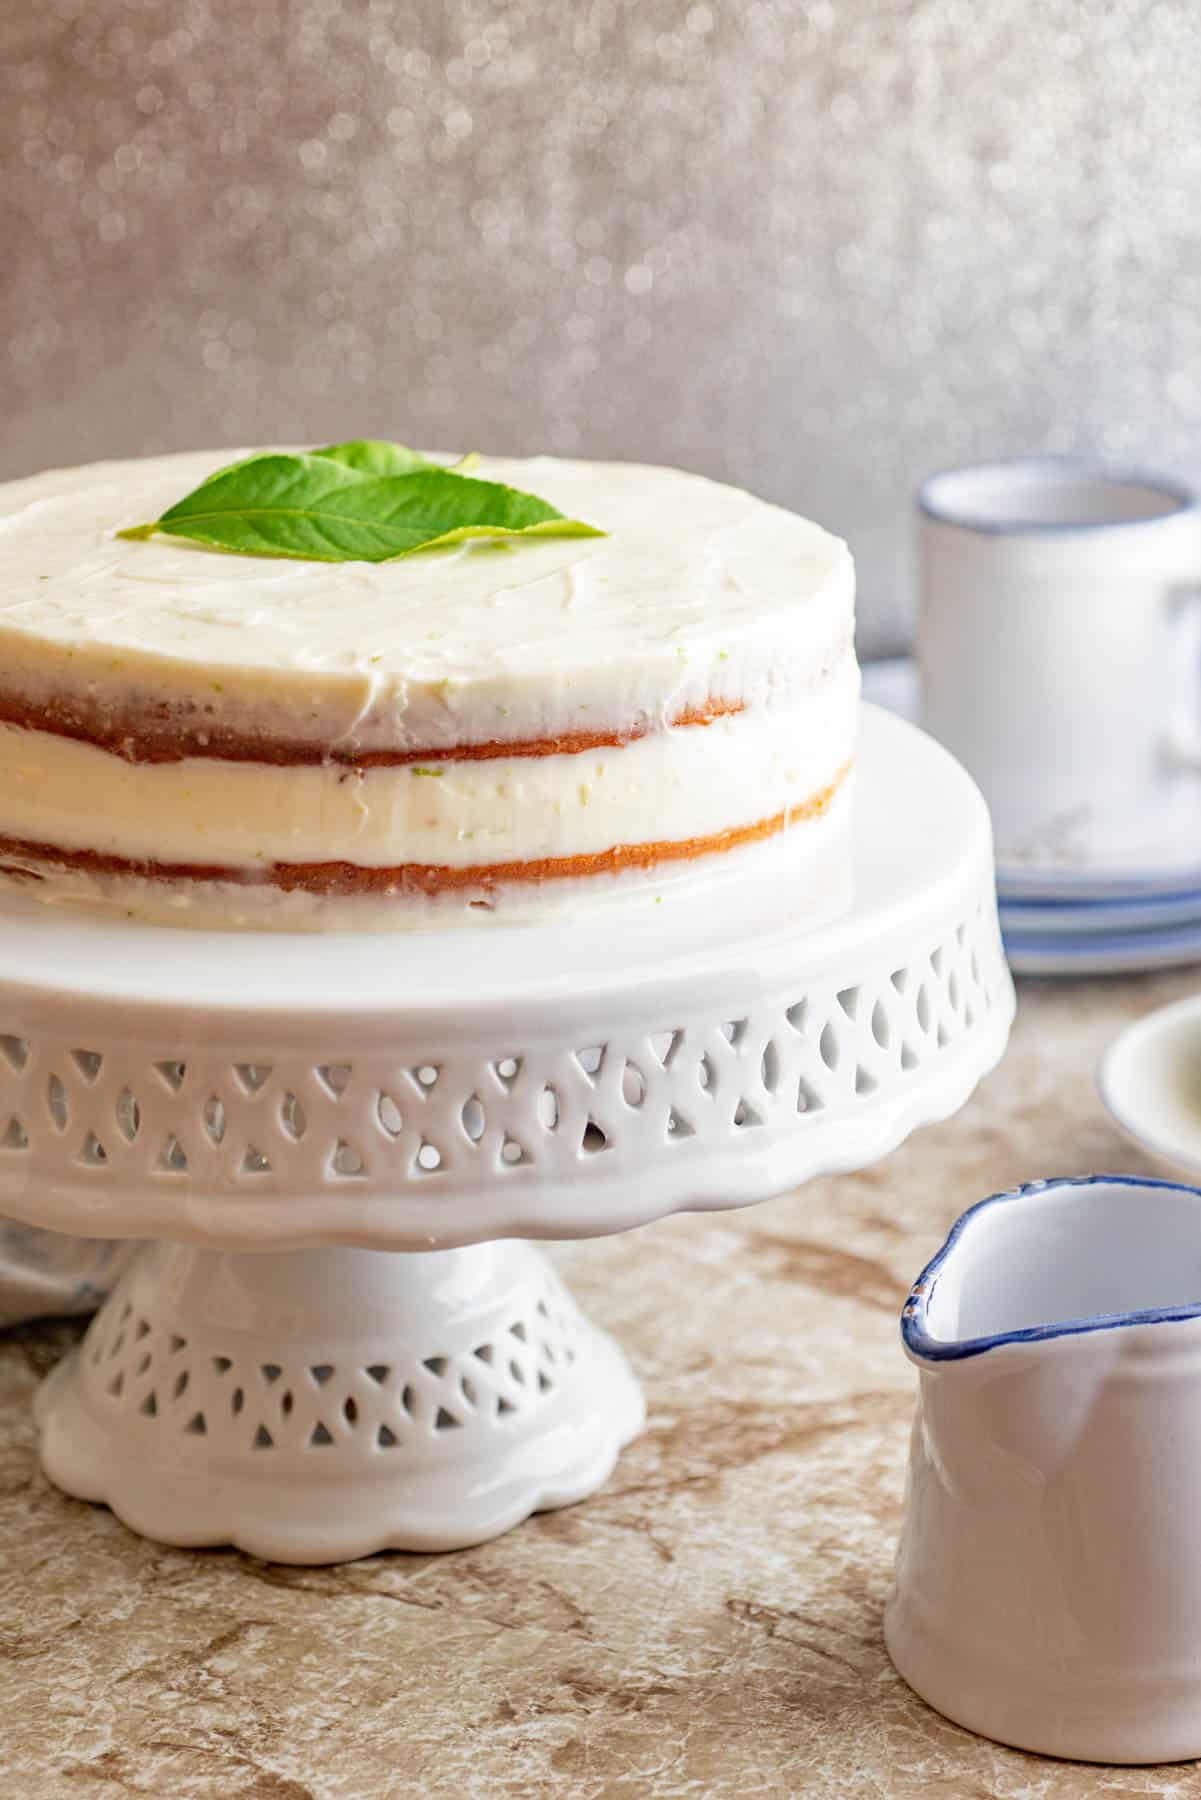 Lime cake with cream cheese frosting.